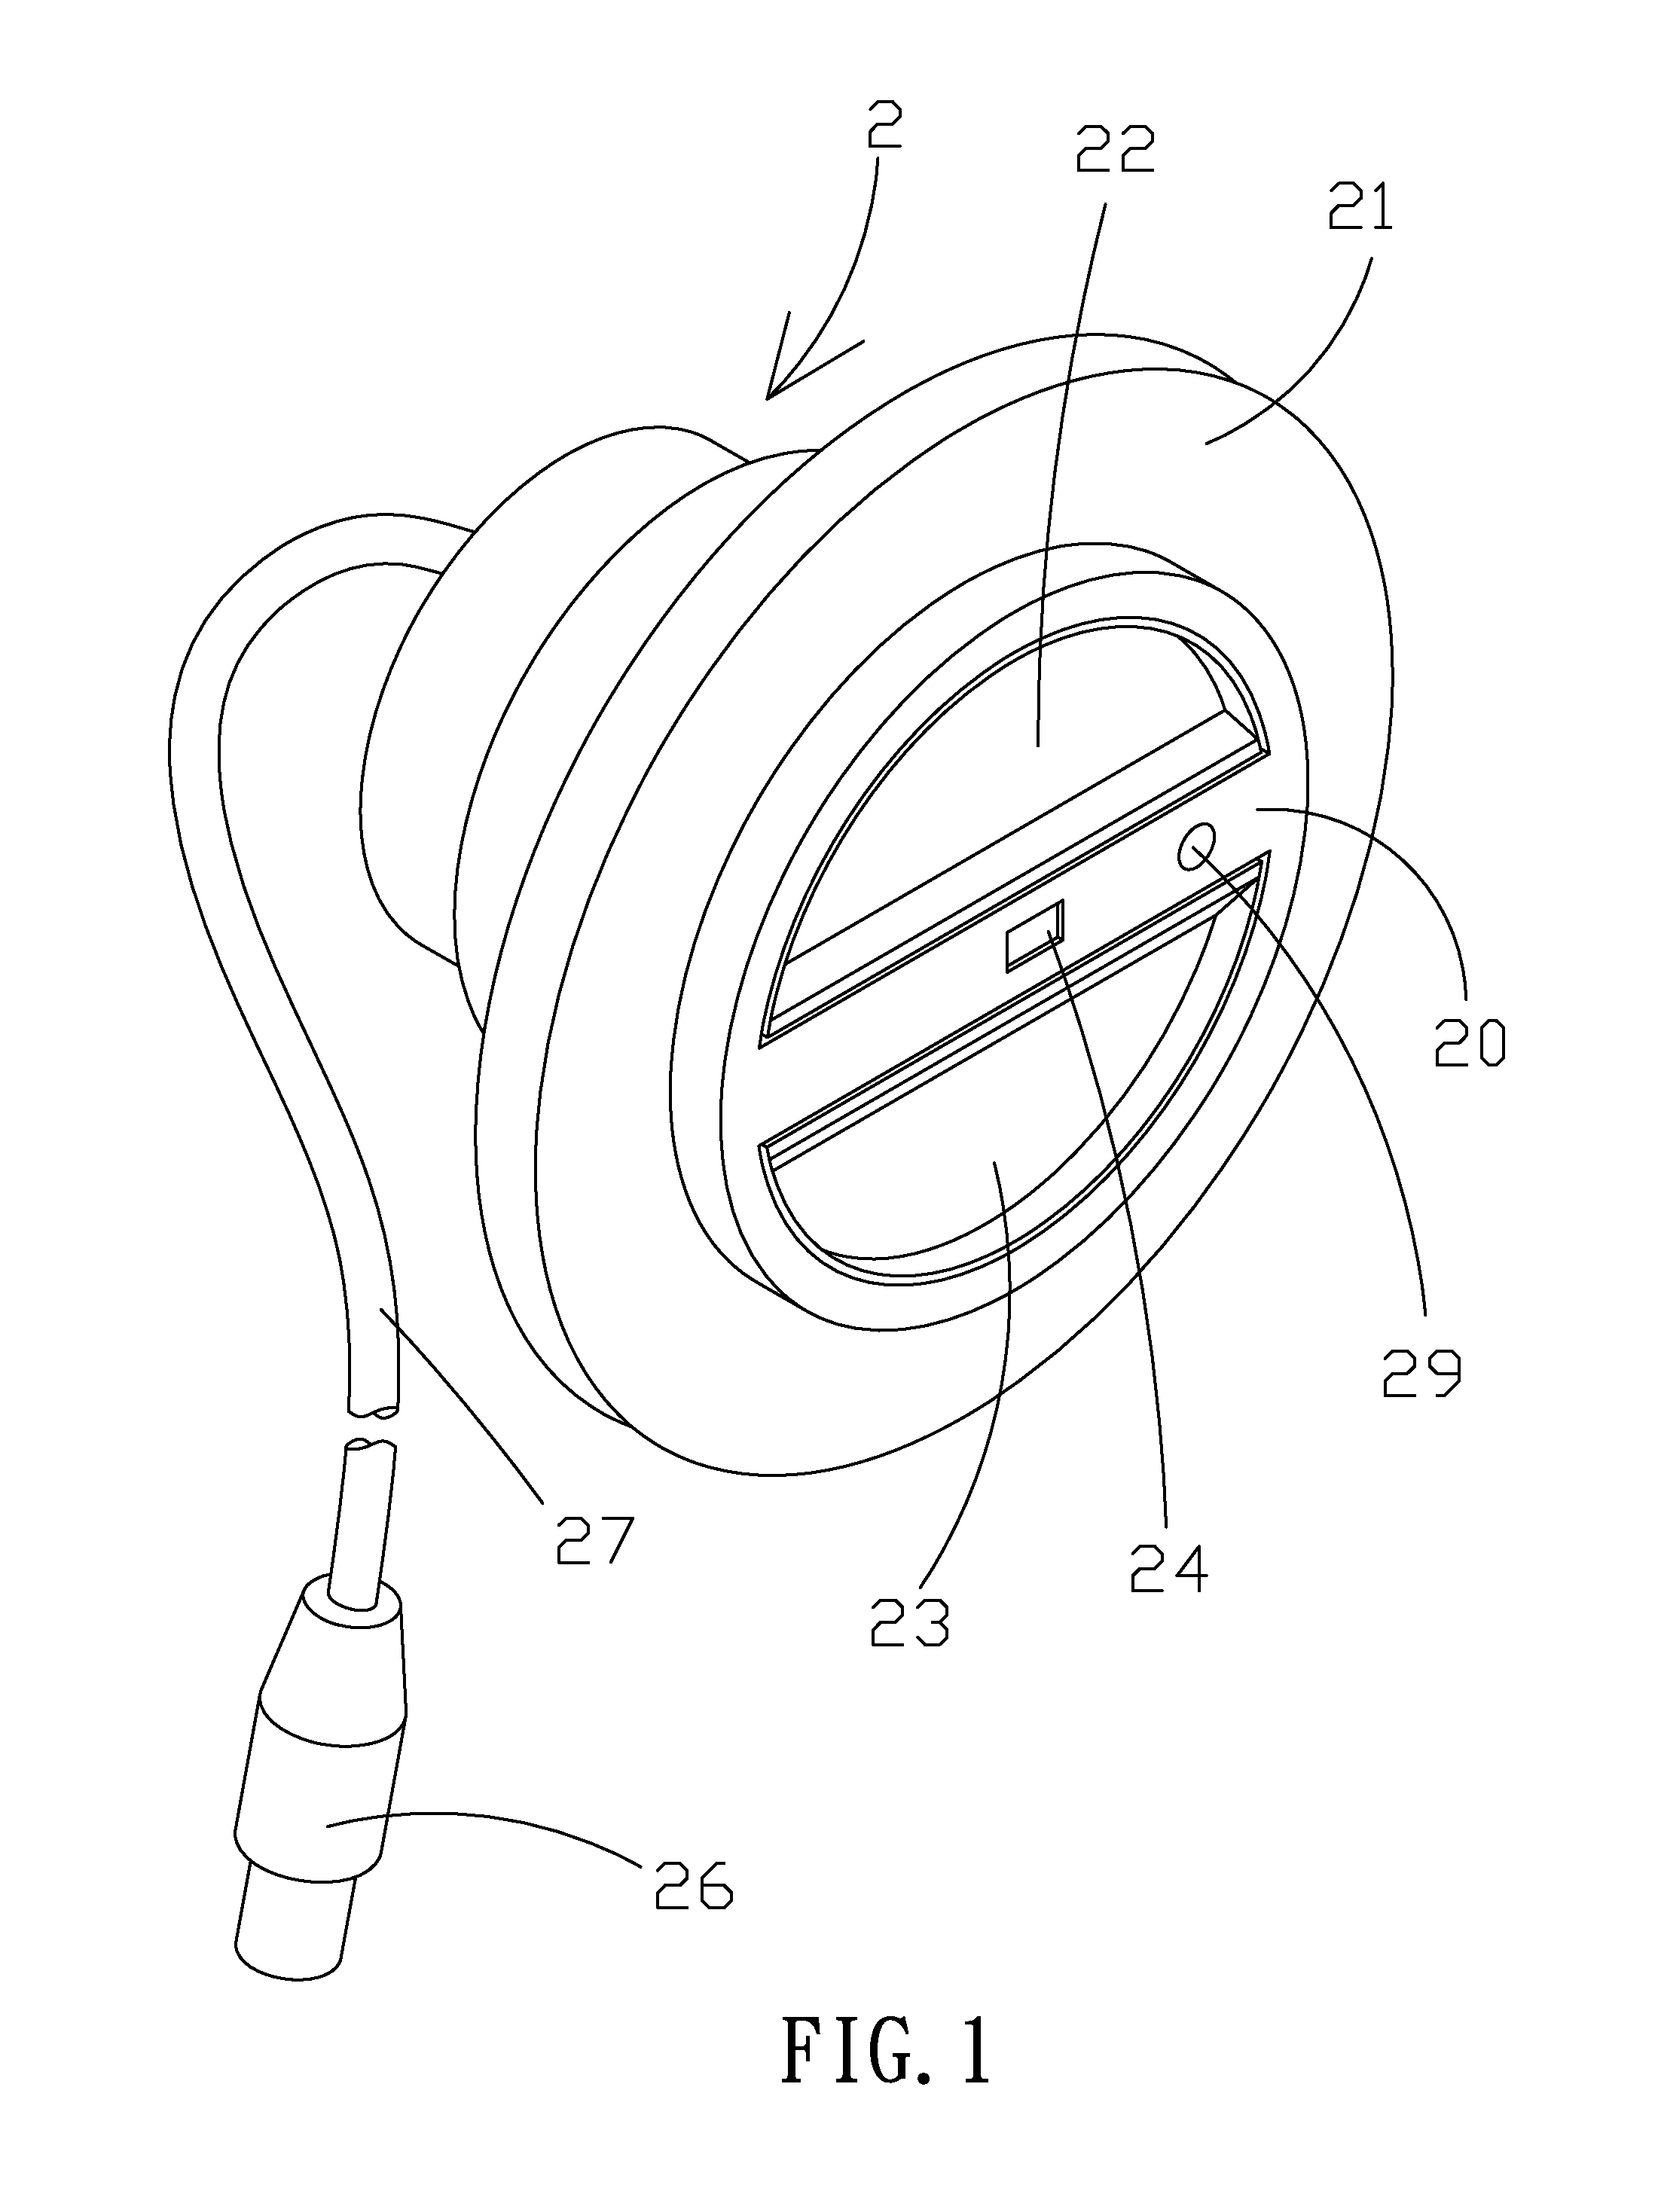 Chair with electrically adjustable components